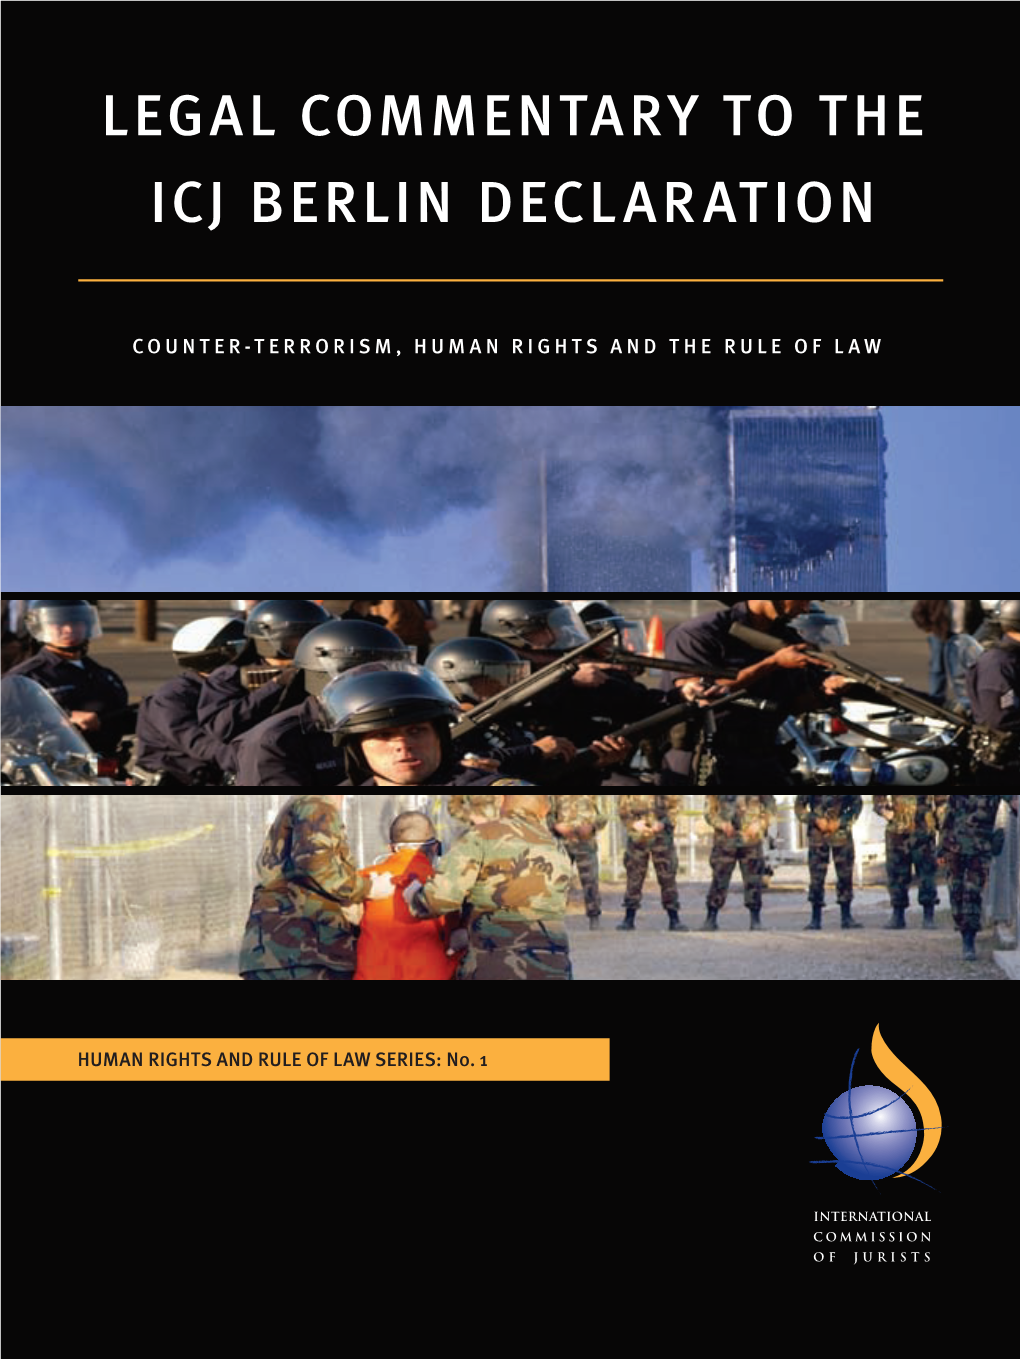 Legal Commentary to the ICJ Berlin Declaration Human Rights and Rule of Law Series: No